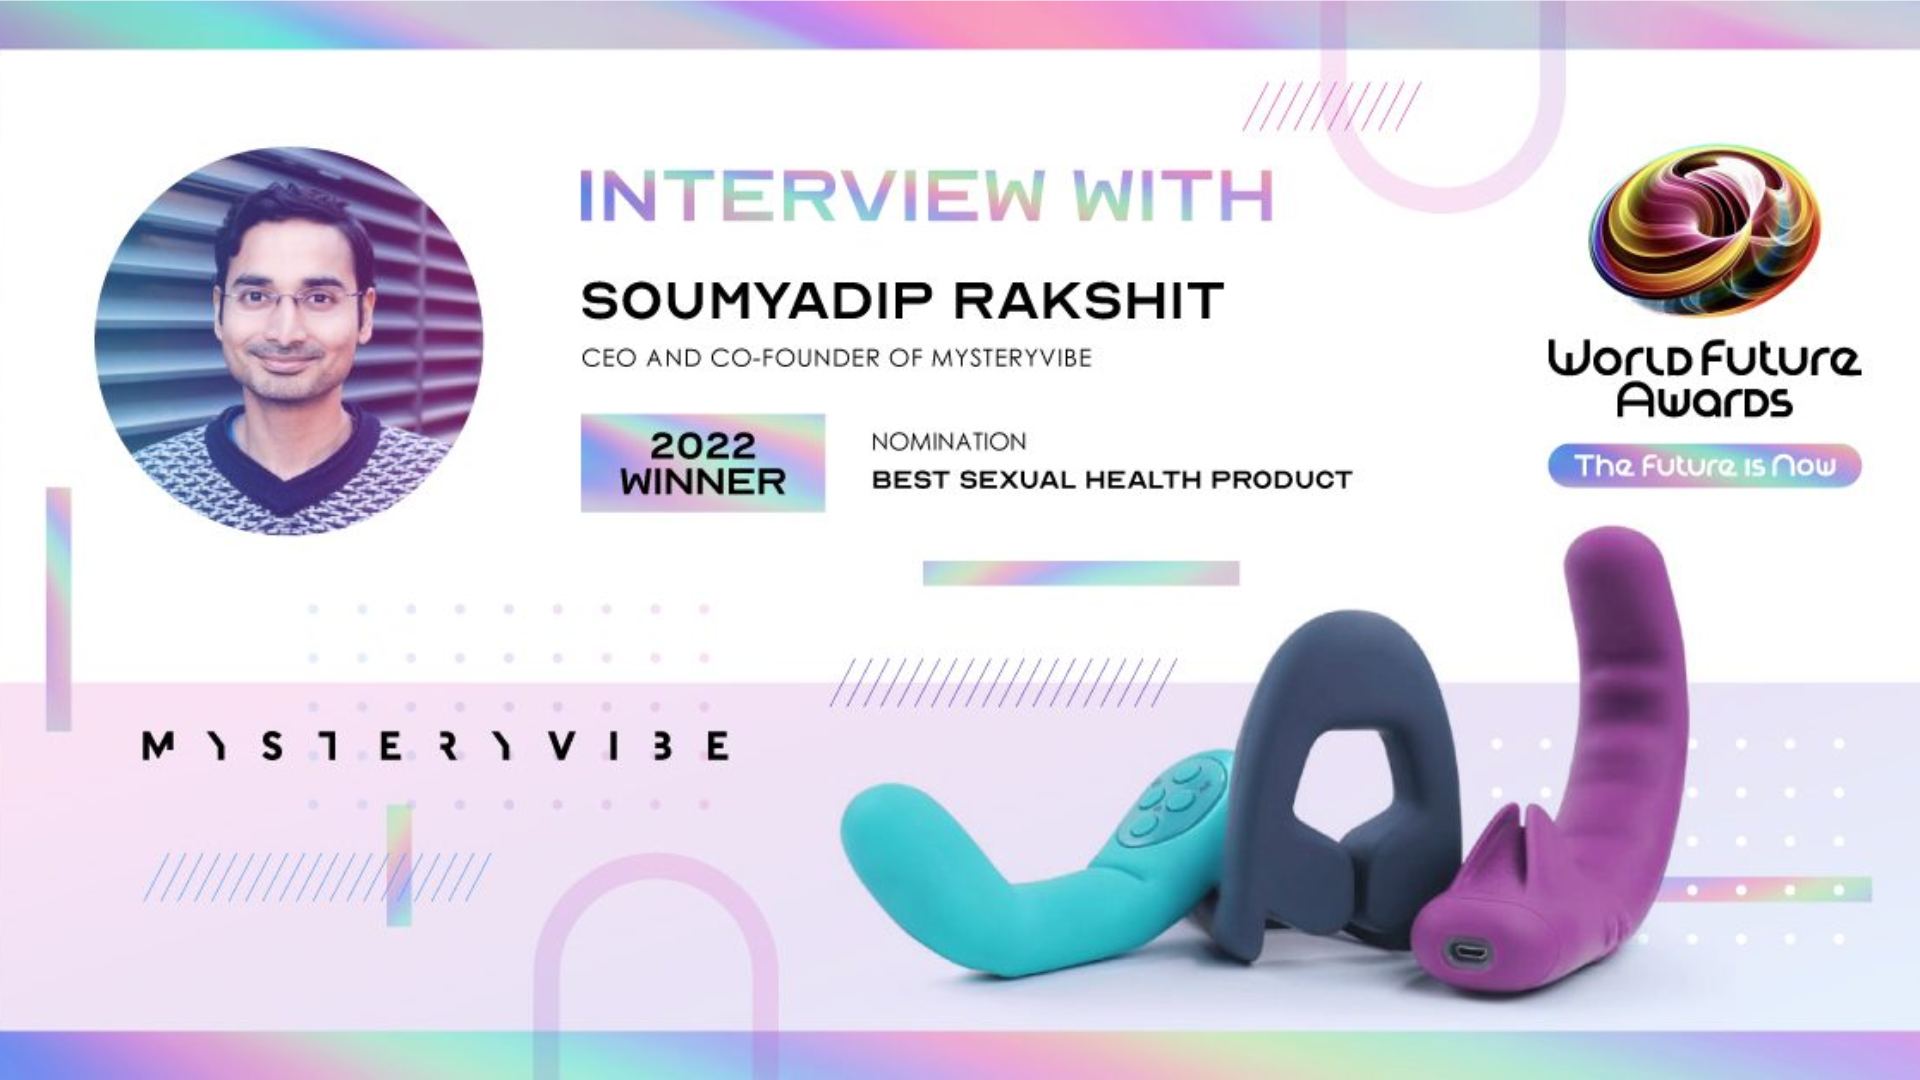 Interview with Soumyadip Rakshit, CEO and Co-Founder of MysteryVibe